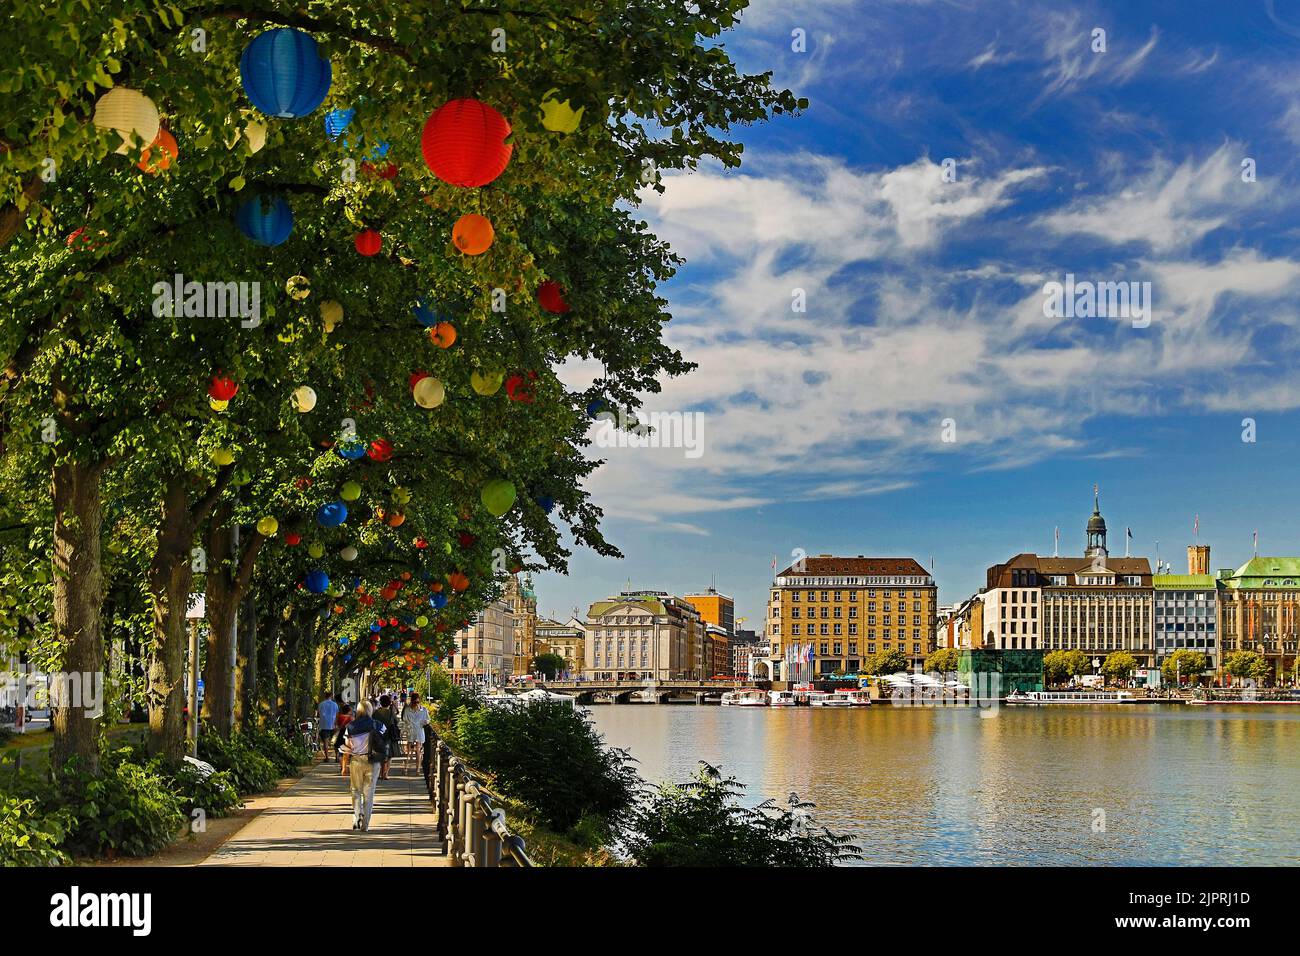 The trees on Ballindamm by the Inner Alster Lake are decorated with lanterns at Hamburg's summer gardens, Hamburg, Germany Stock Photo